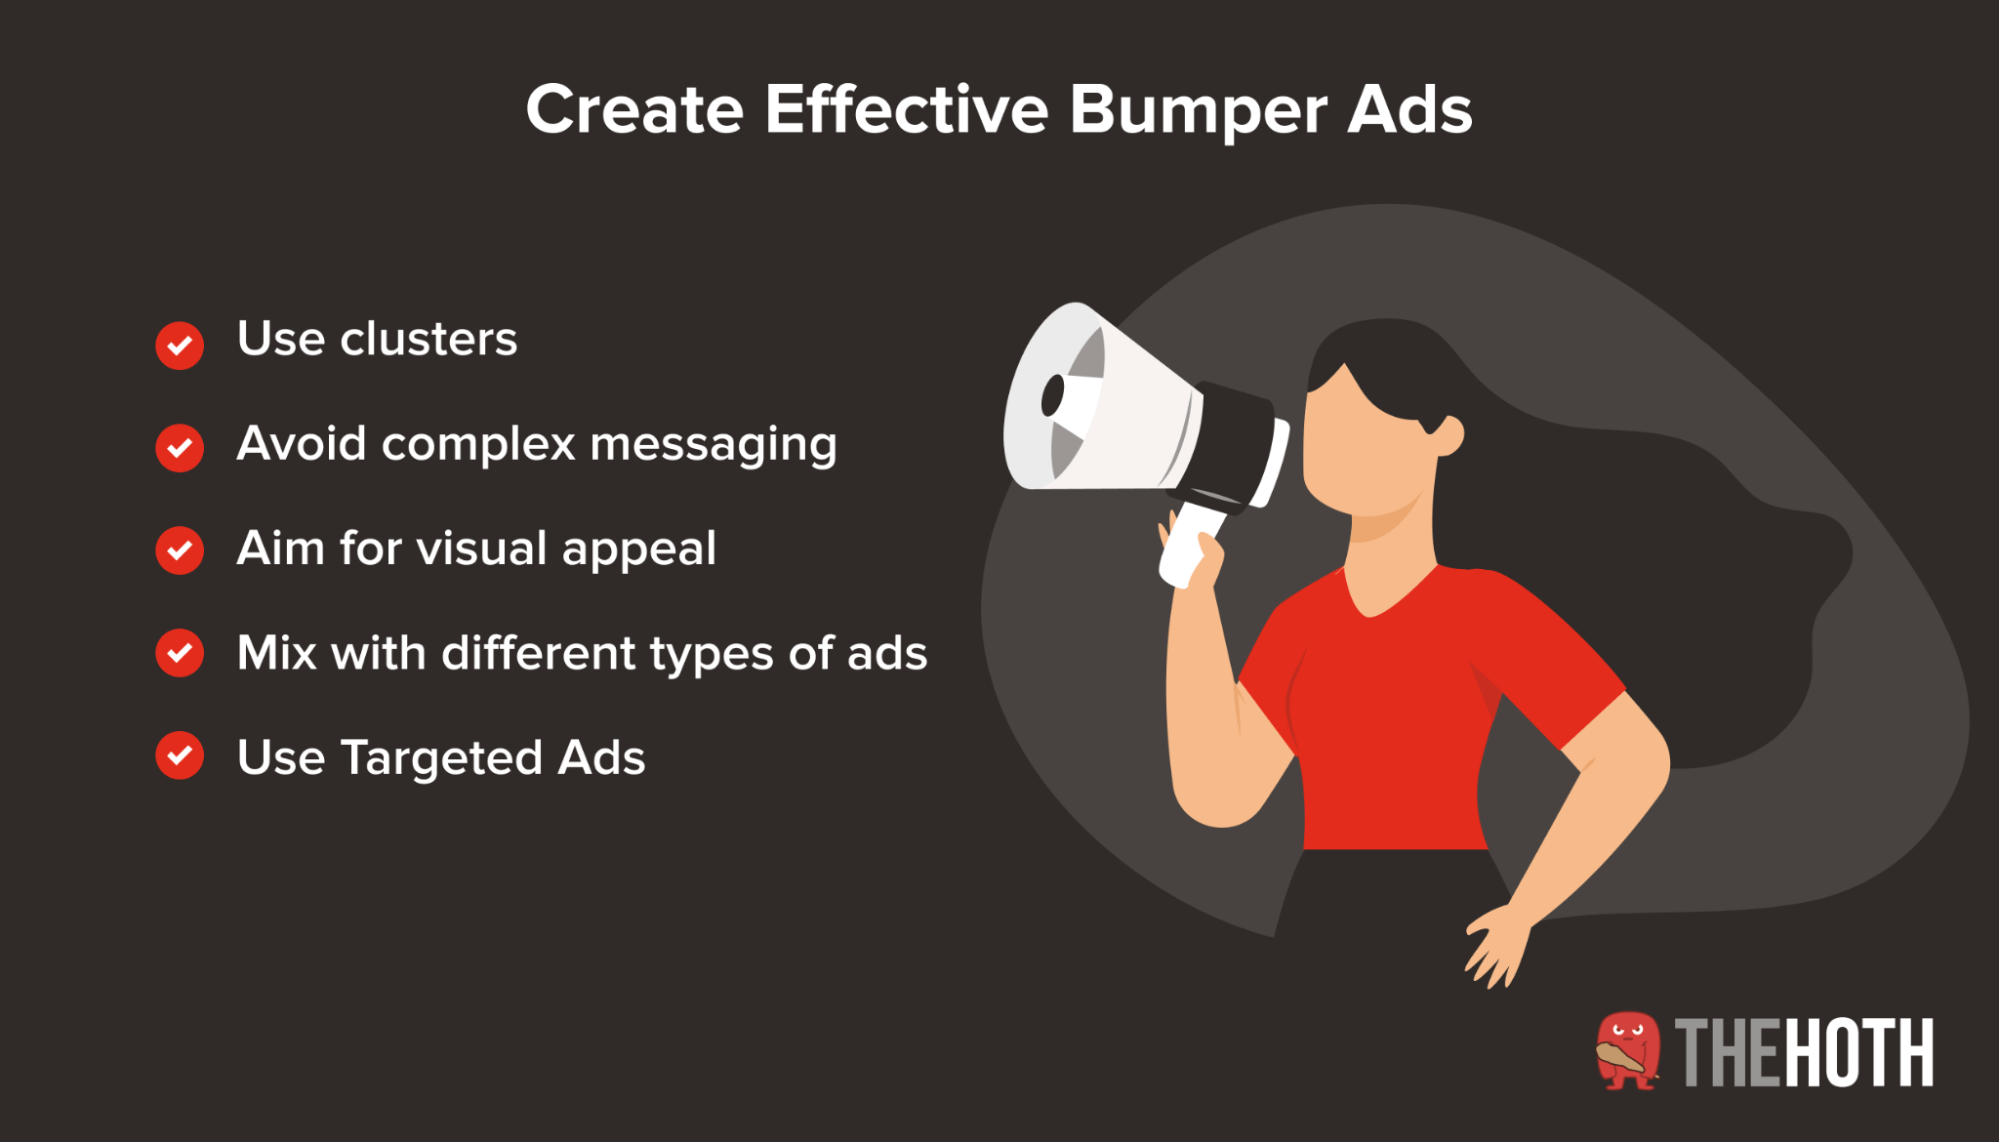 5 best practices to build stunning bumper ad campaigns